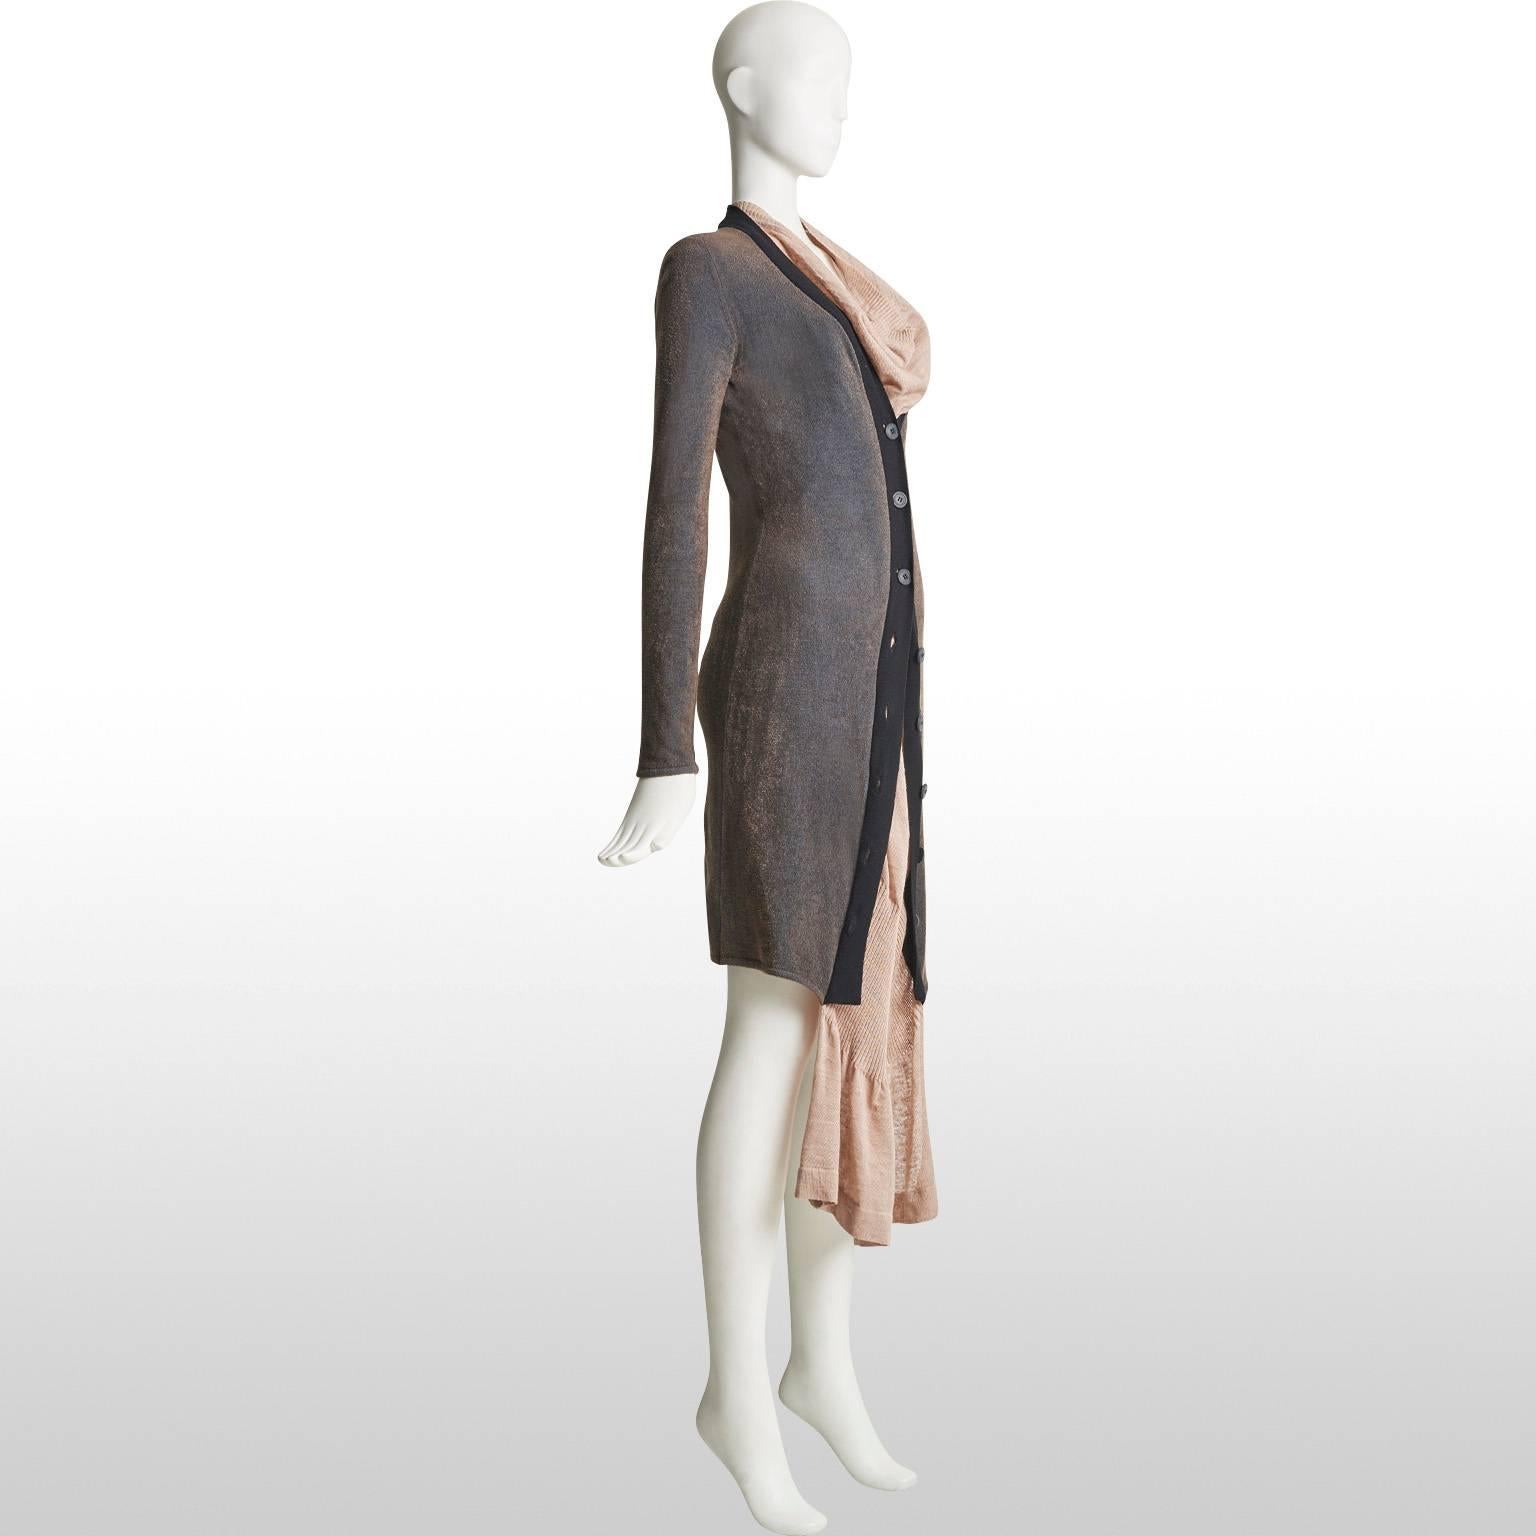 Vivienne Westwood Gold Label Two Tone Cardigan Dress For Sale 1